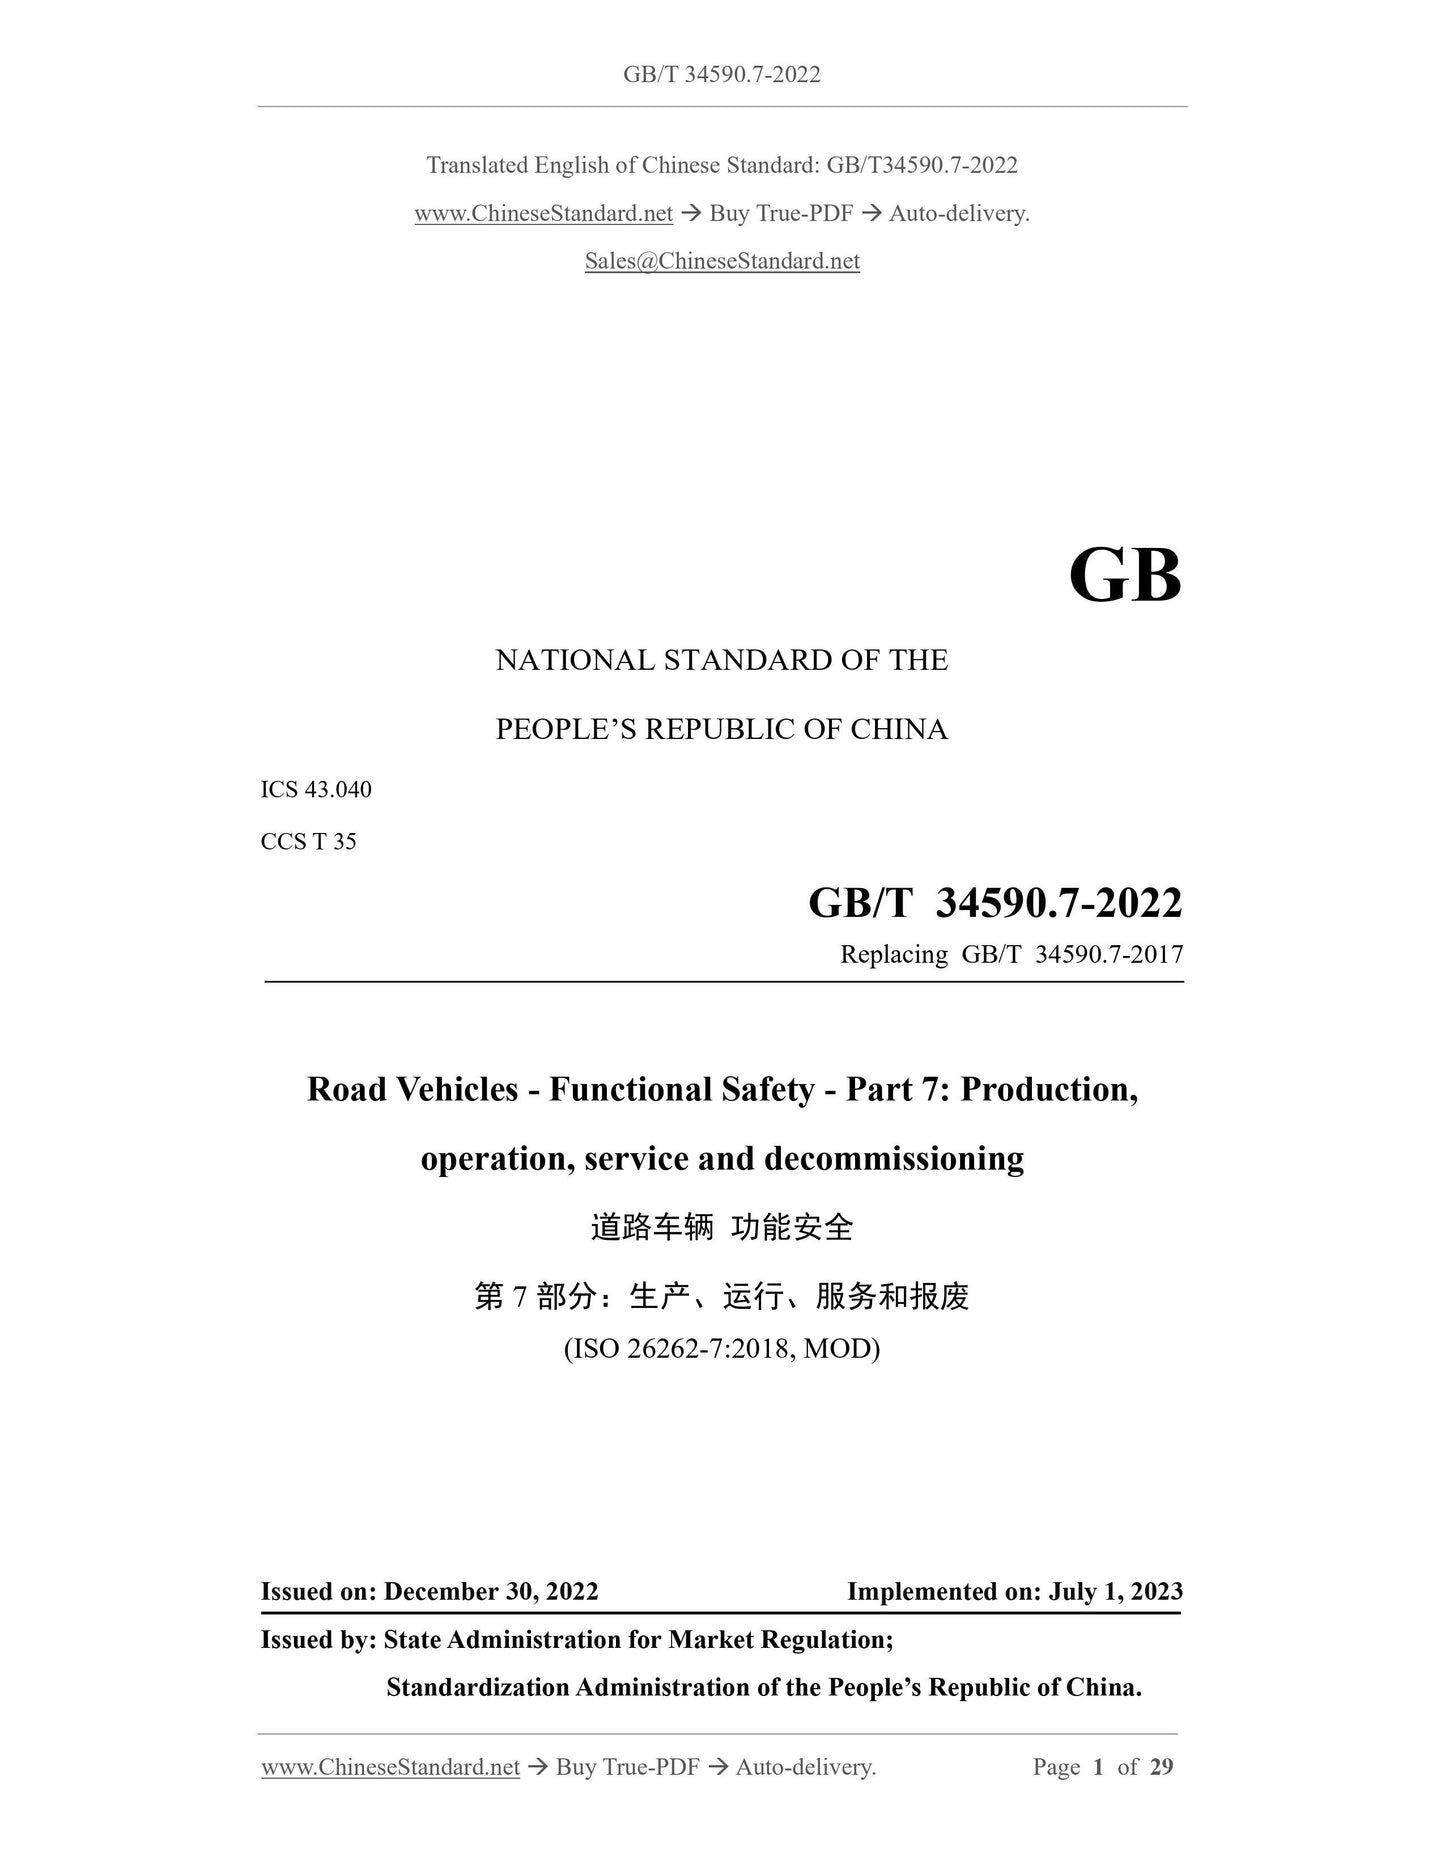 GB/T 34590.7-2022 Page 1